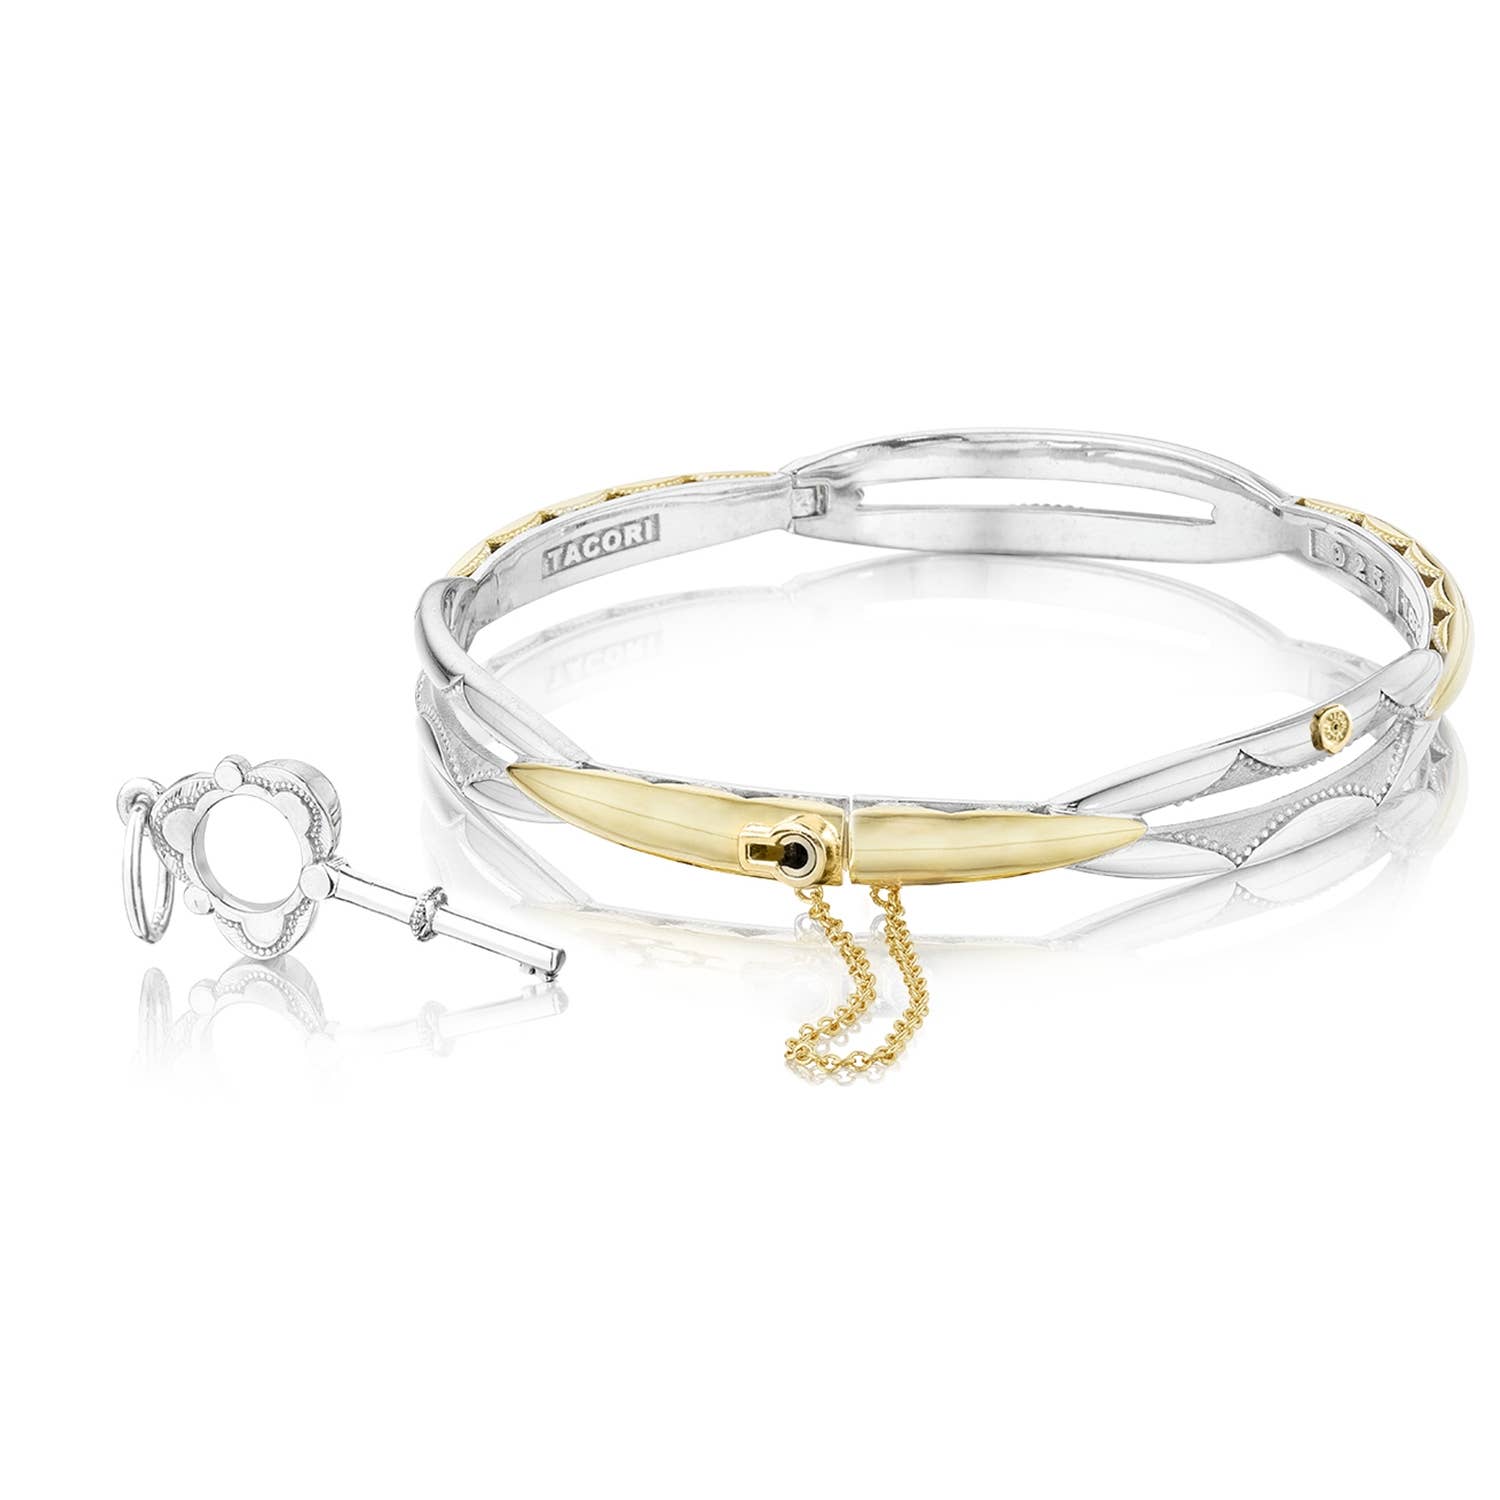 Promise Bracelet Round, Yellow Gold and Silver